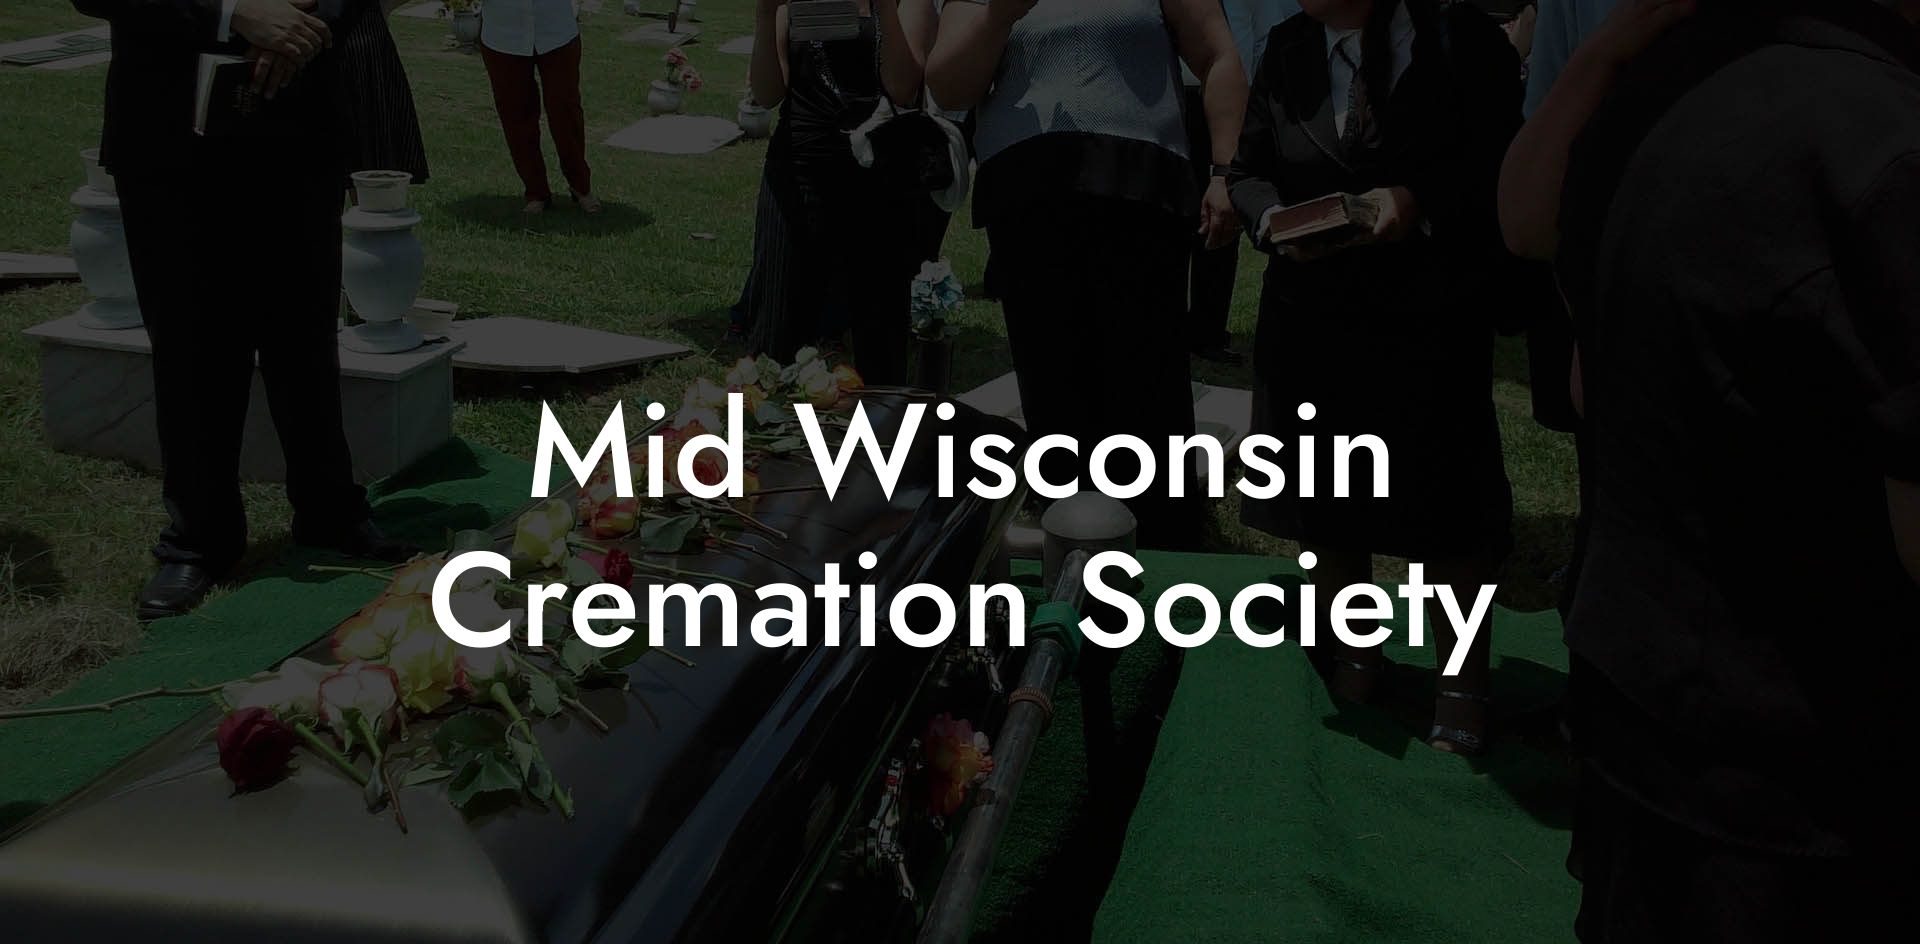 Mid Wisconsin Cremation Society